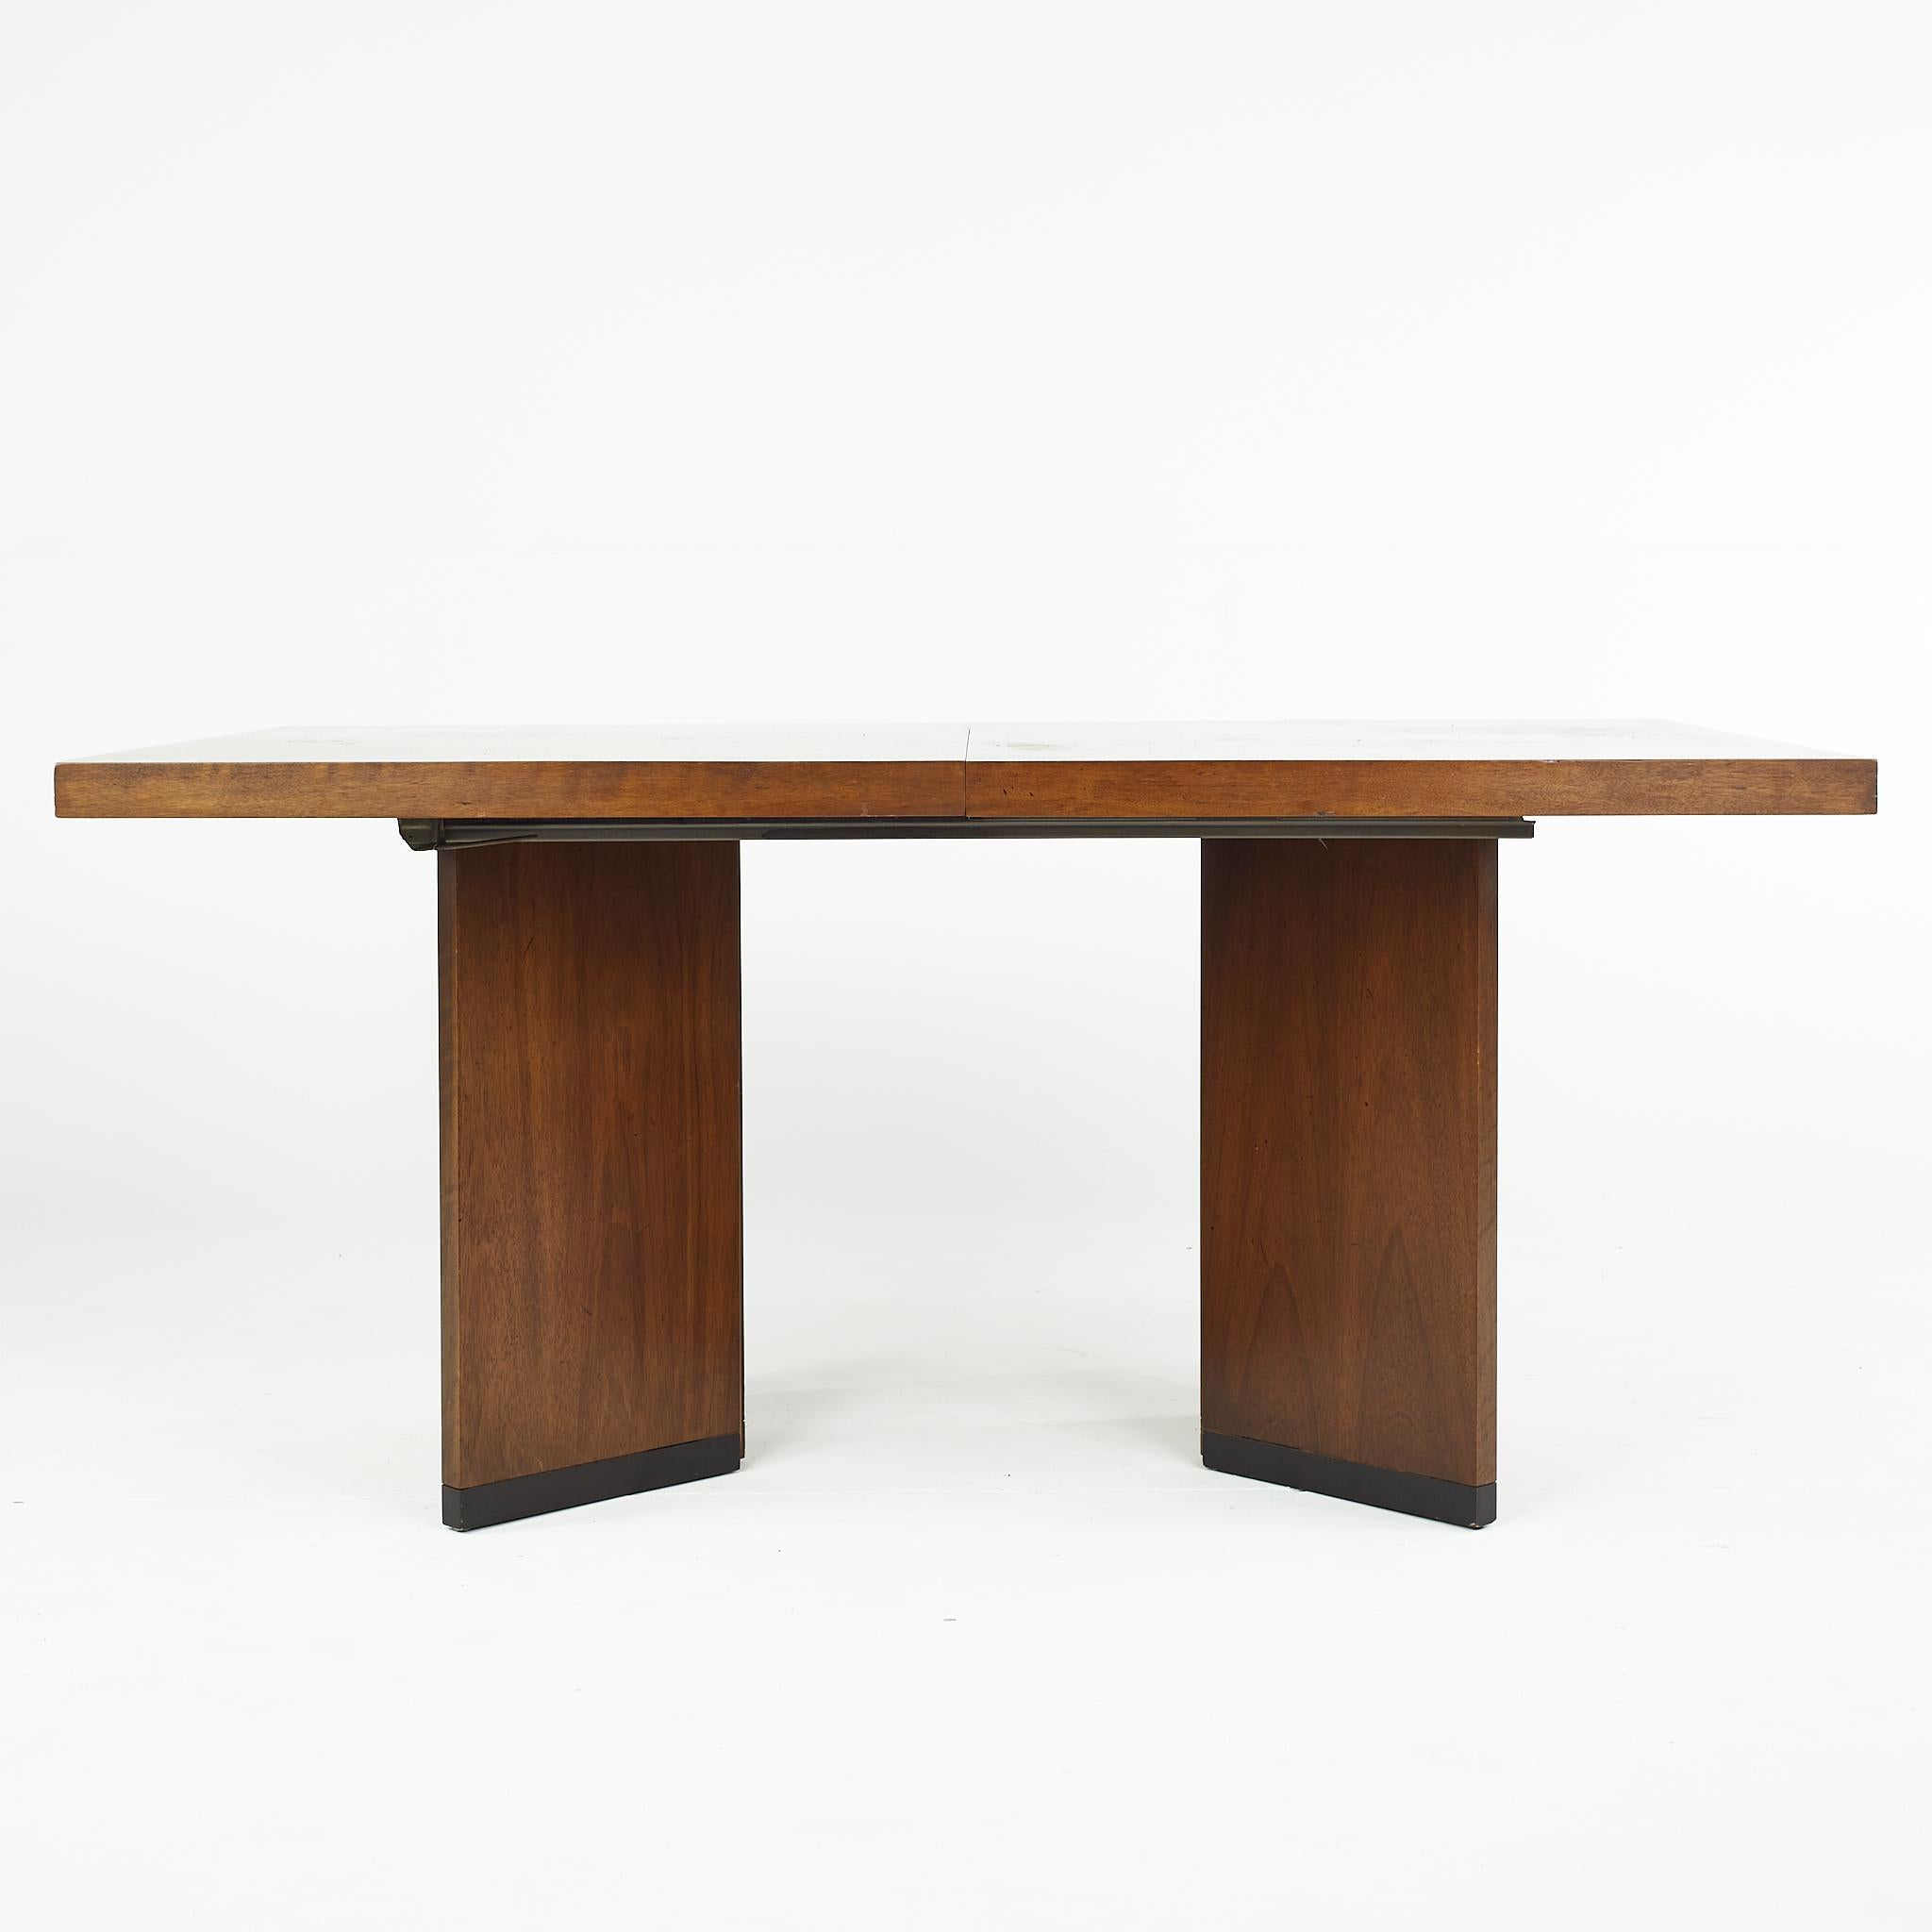 Lane mid century walnut Parquet expanding dining table

This table measures: 71.5 wide x 38 deep x 29.5 inches high; each leaf measures 18 inches wide, making a maximum table width of 107.5 inches when both leaves are used

All pieces of